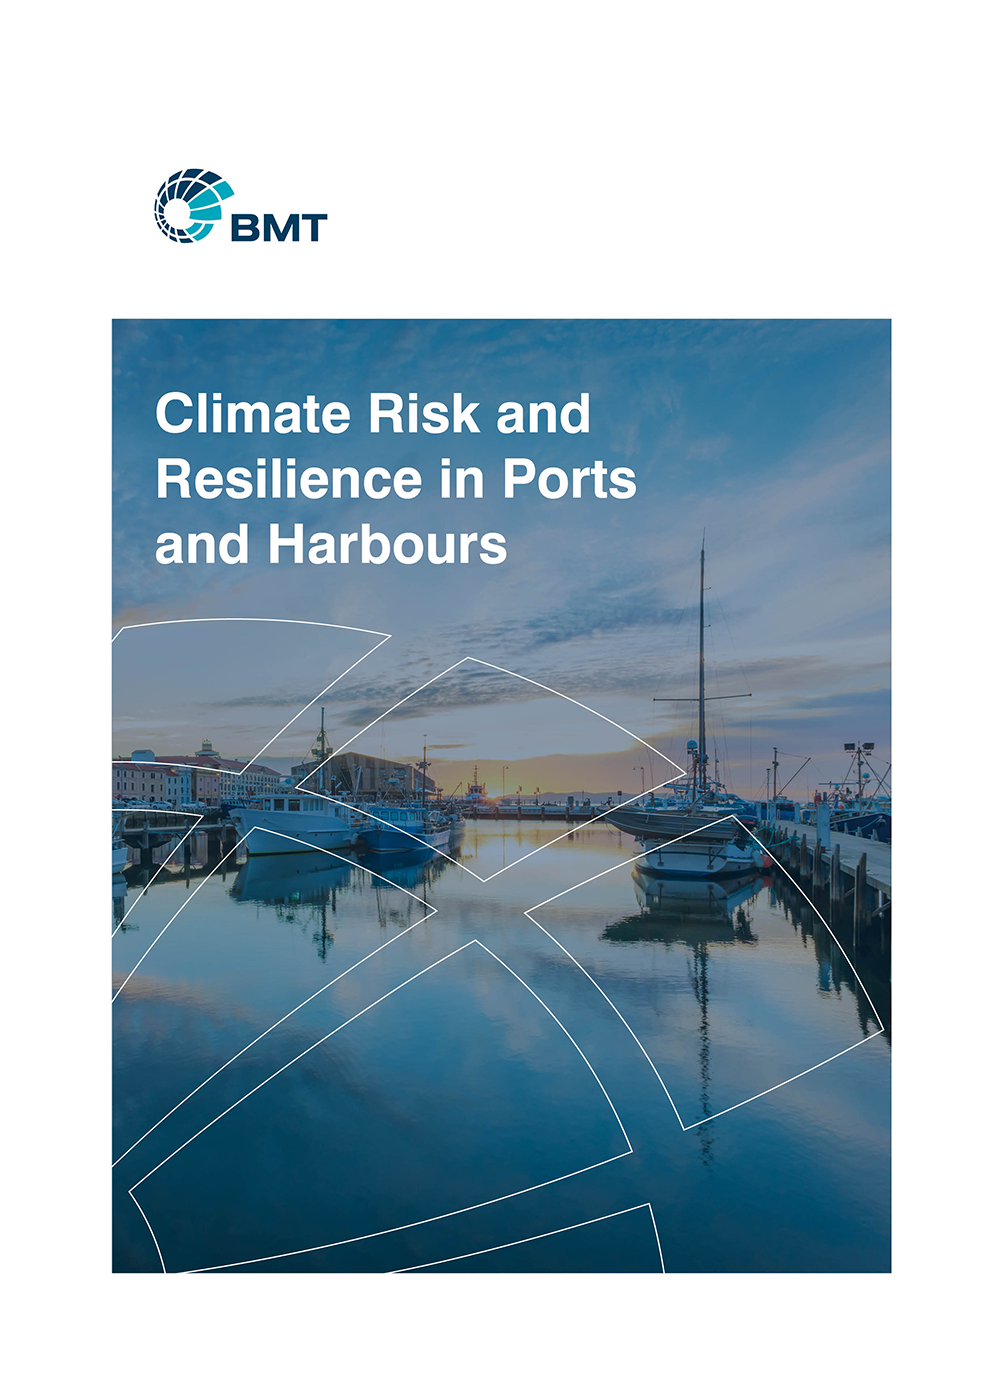 BMT's services for climate risk and resilience in ports and harbours